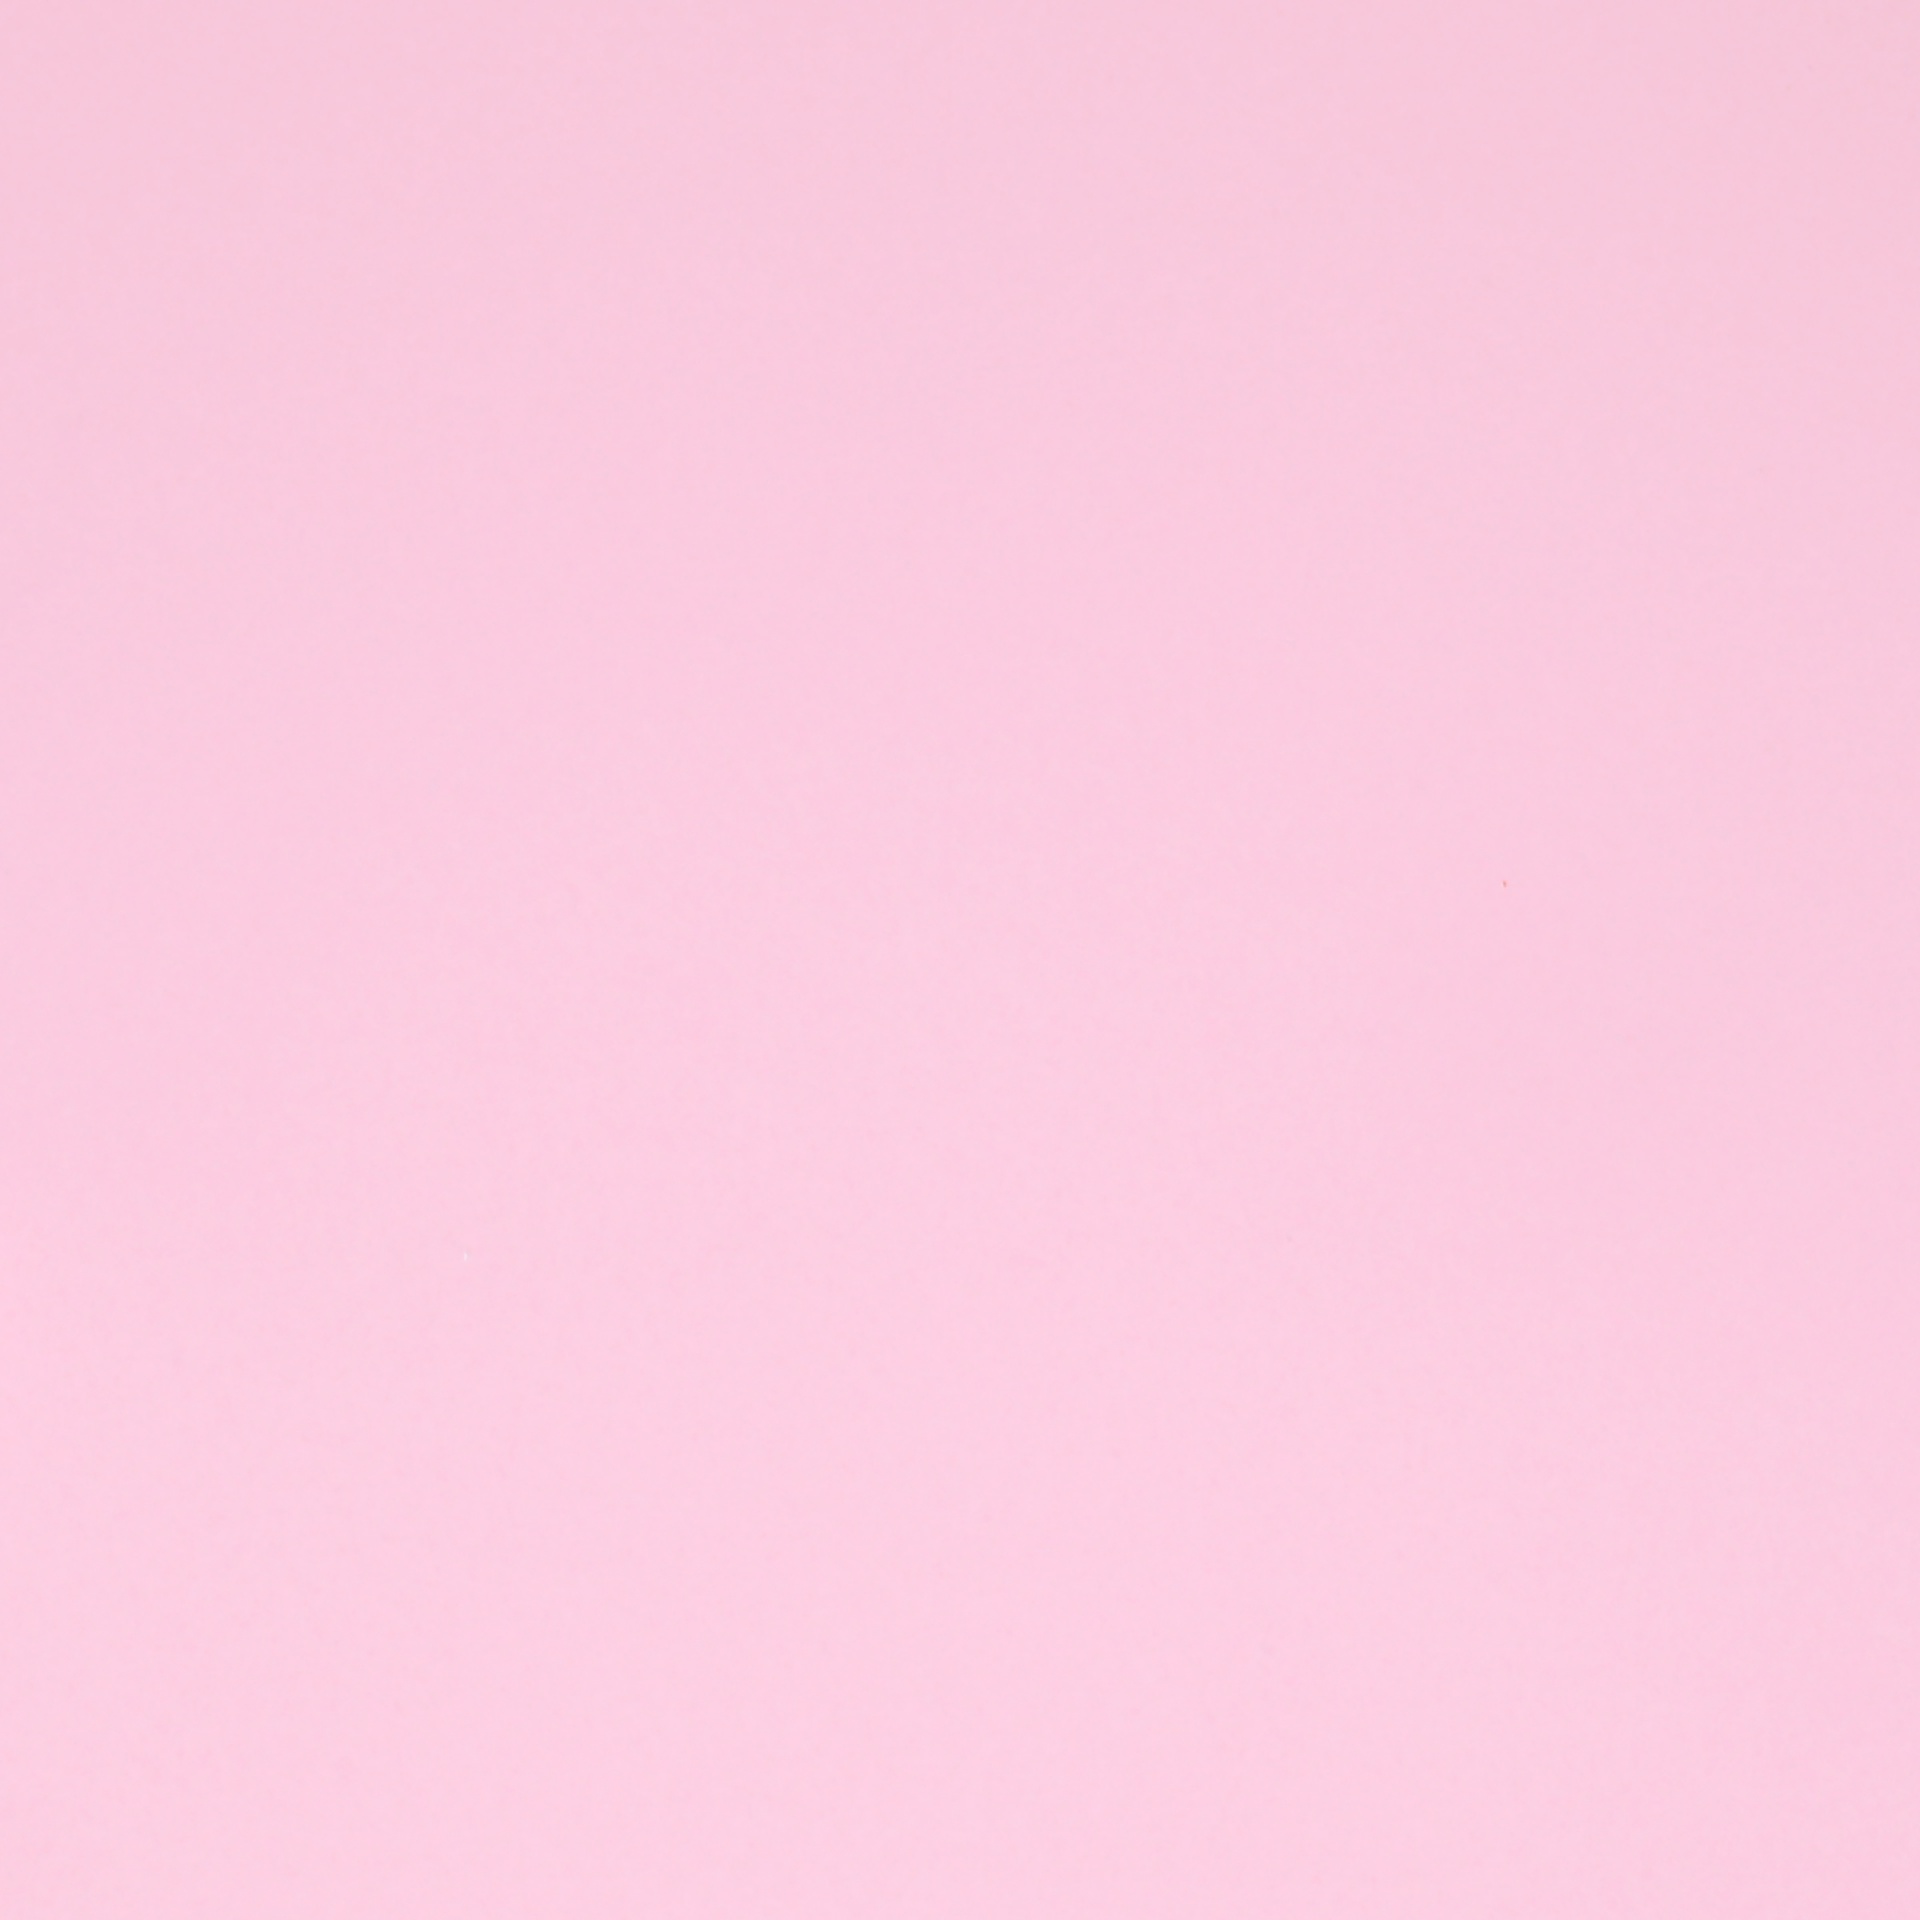 background pink paper free photo